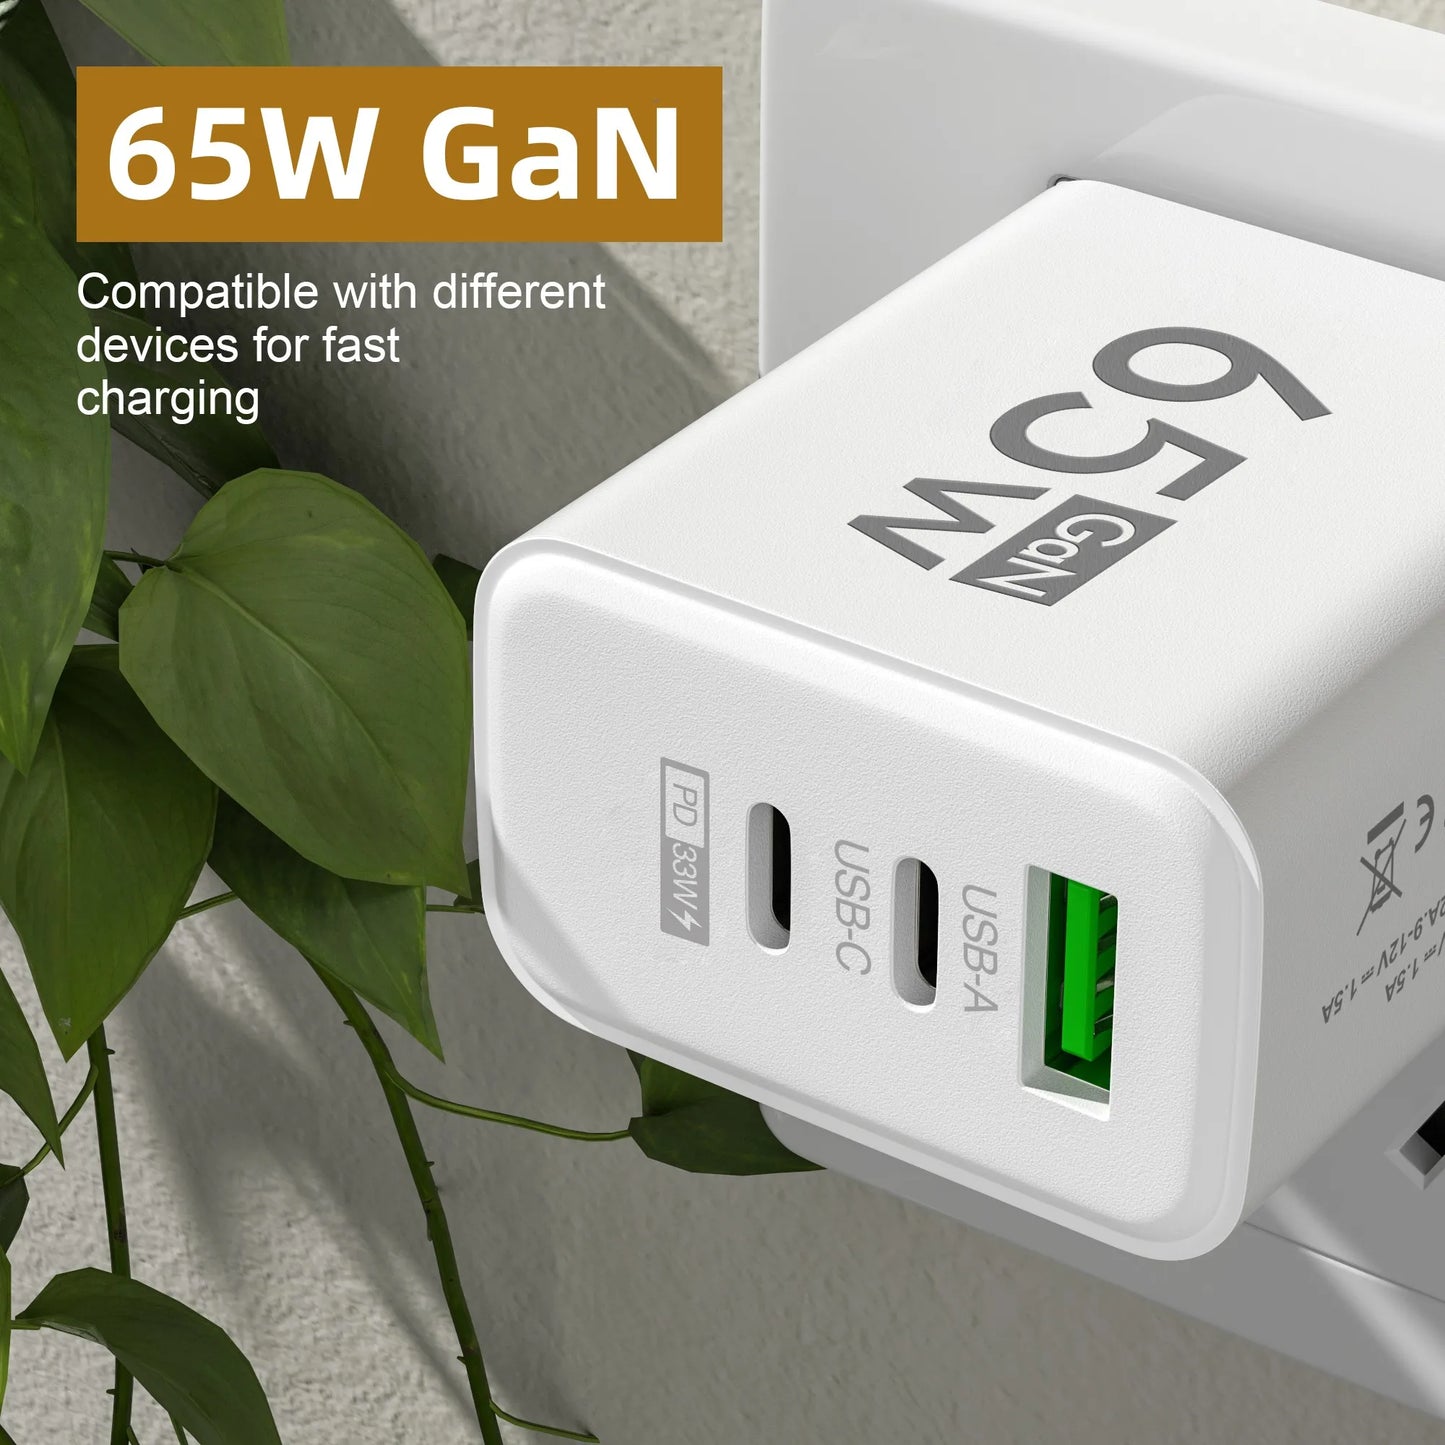 65W 3 Ports USB PD Charger - Type C Fast Charging Adaptor